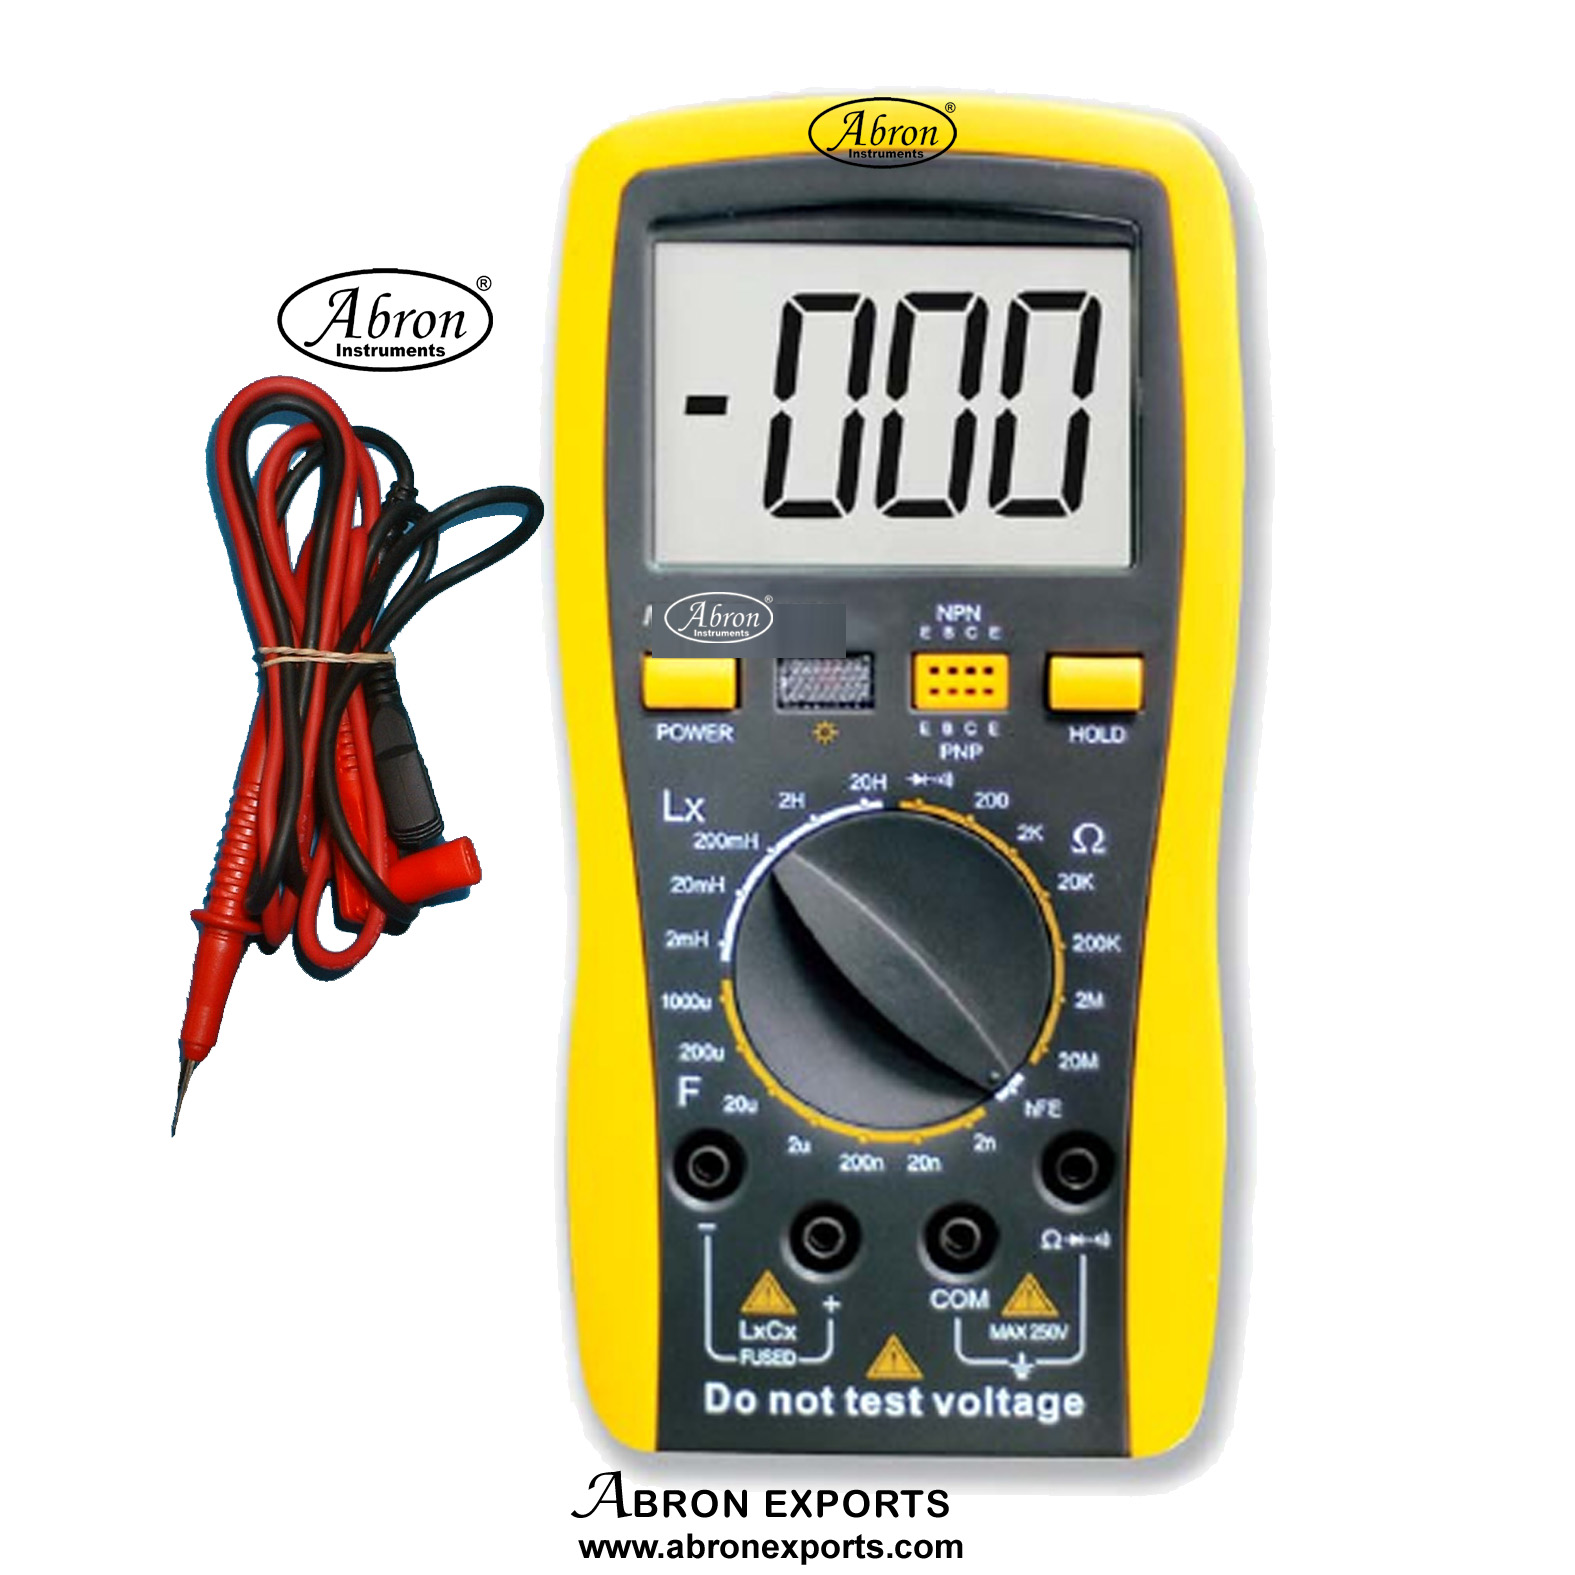  LCR Multimeter Digital Capacitance 2nf-1000uf Inductance 2mH-20H Resistance Ohms 200-20M Hold HFE  AE-1319LCR